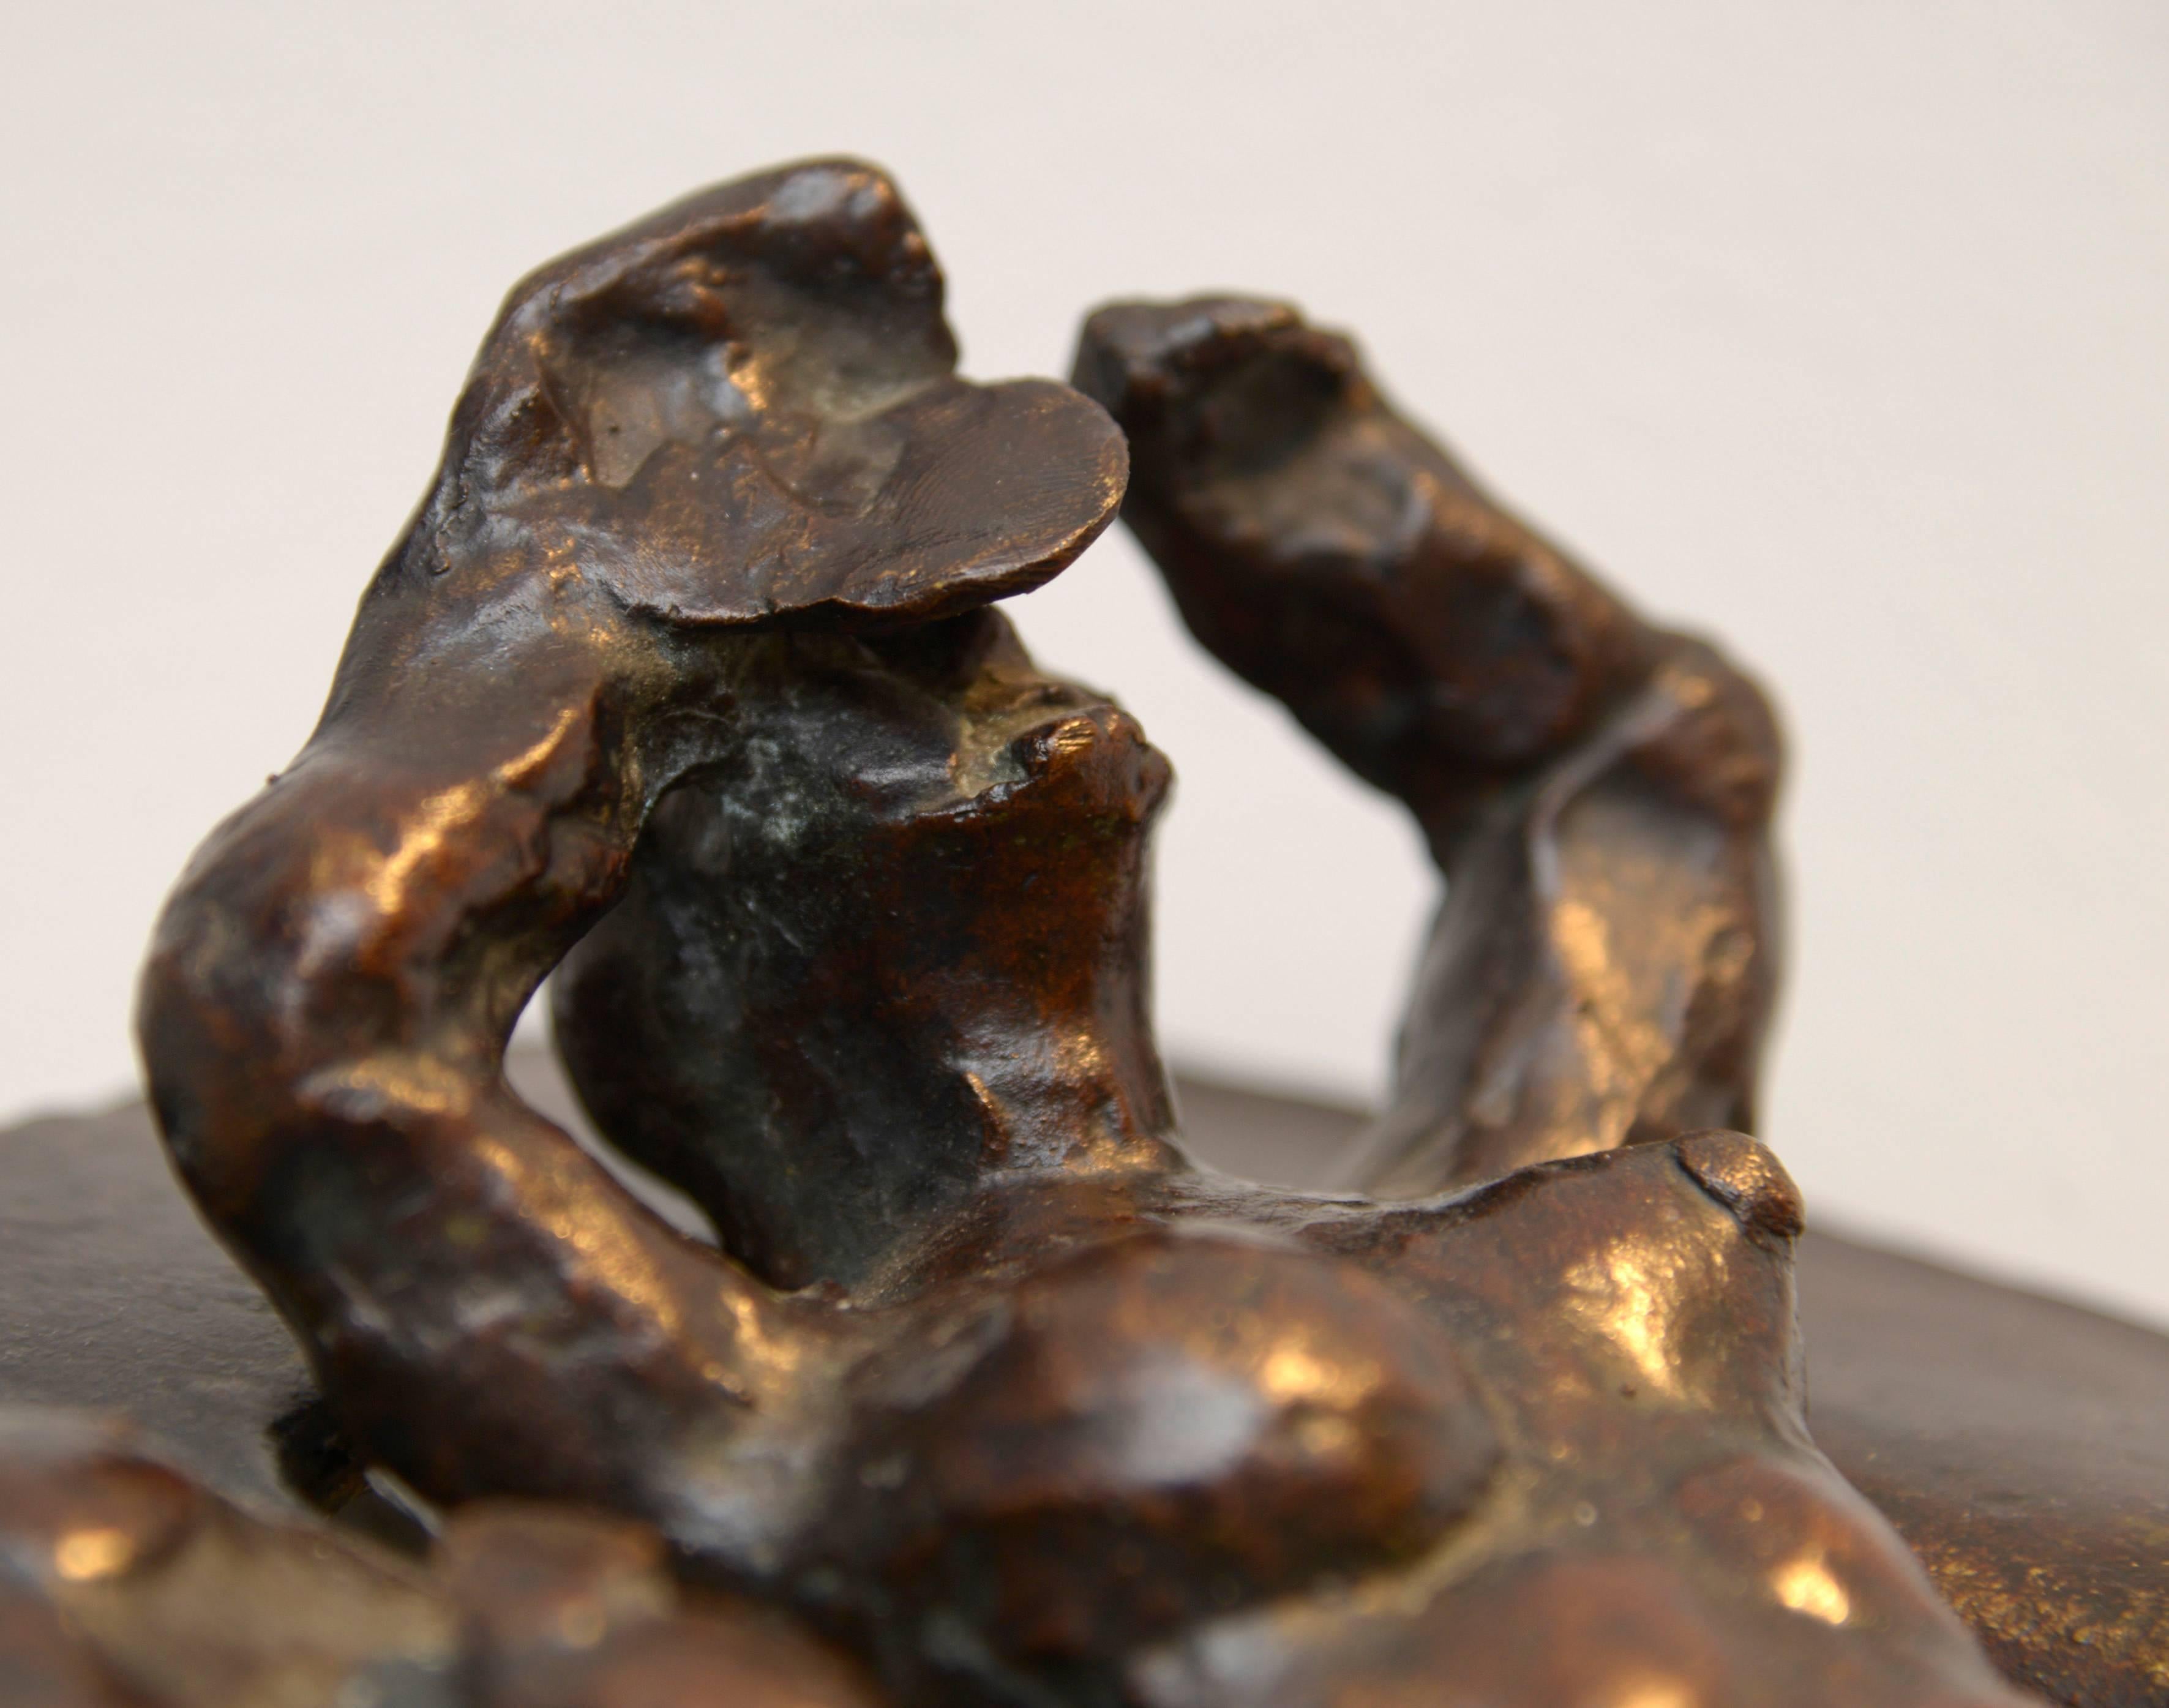 Femme au Bain
Jean-Robert Ipousteguy bronze sculpture.
In two parts
Valsuani foundry seal
Numbered 1/9 dated 1966.